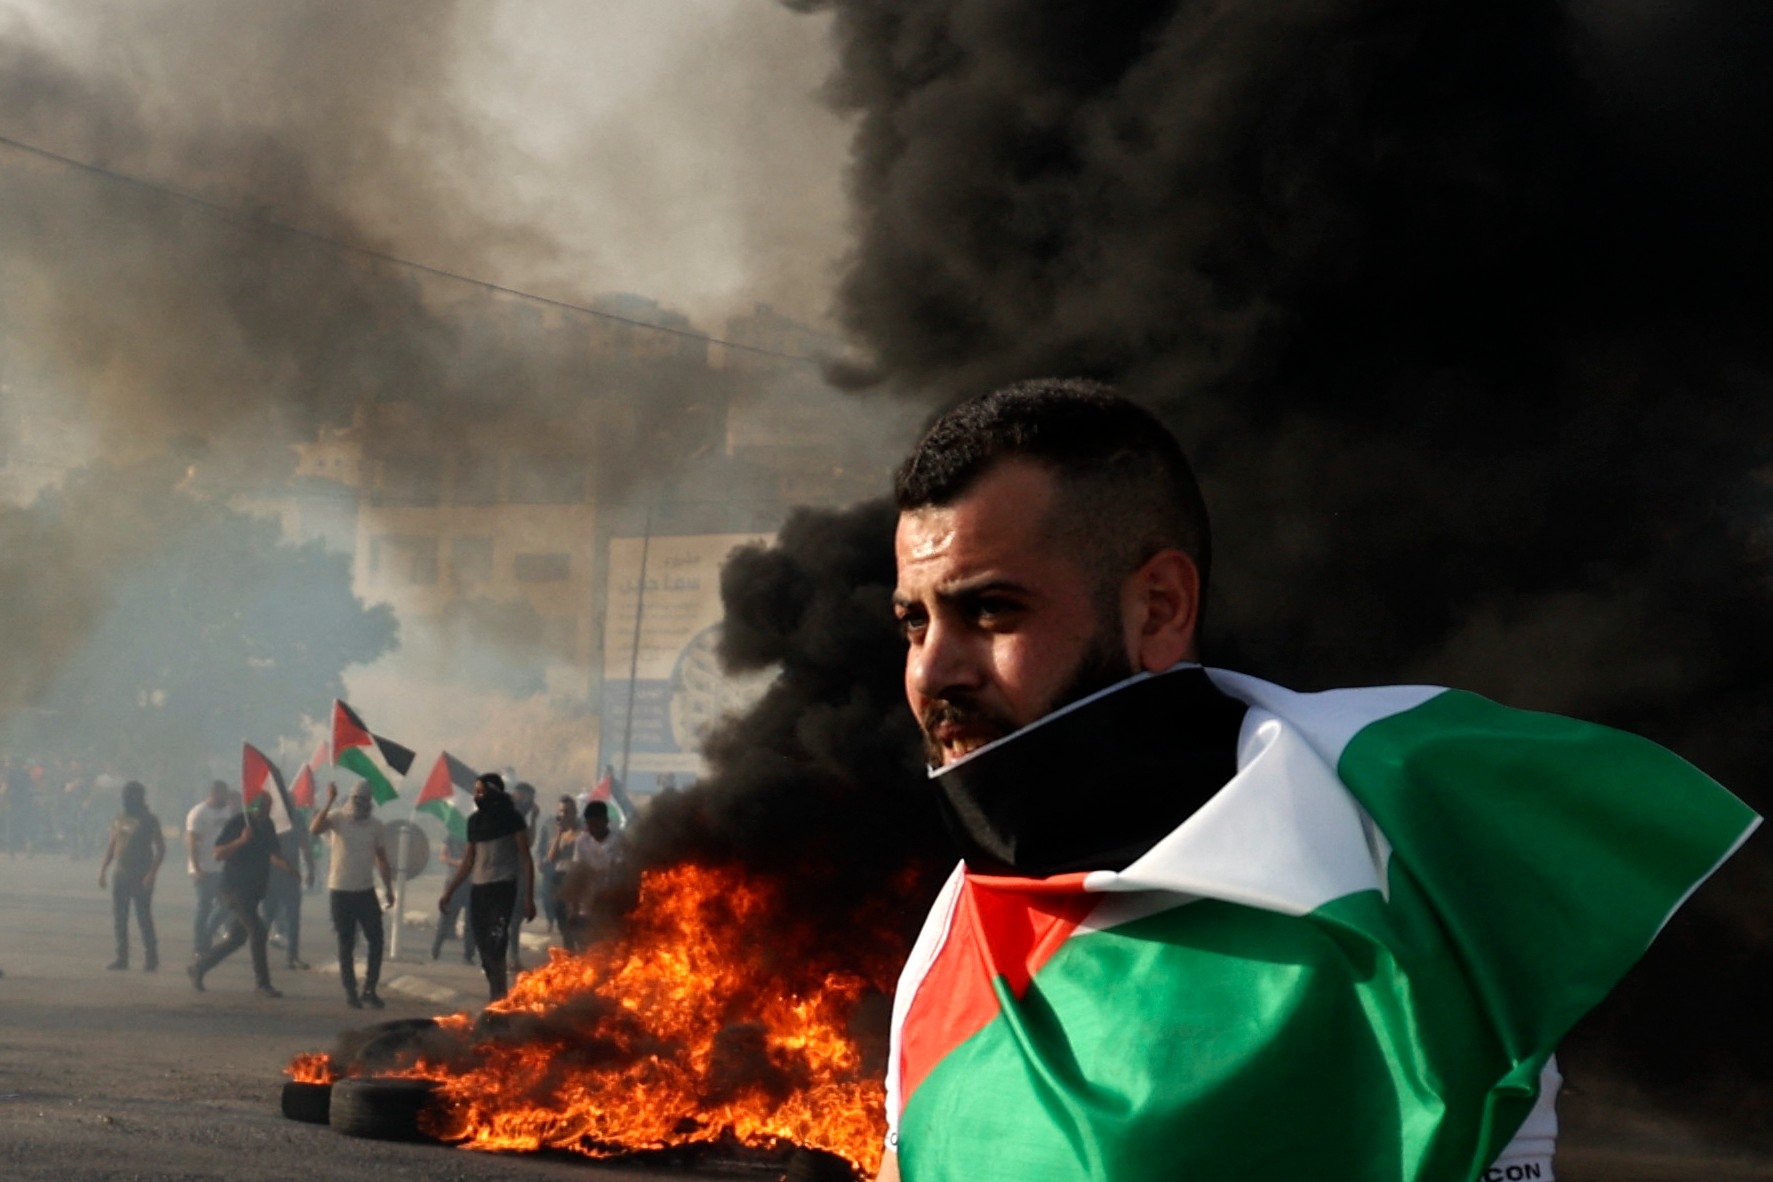 A Palestinian protester at a demonstration outside the Huwara military checkpoint near Nablus in the occupied West Bank on 29 May 2022. (AFP)